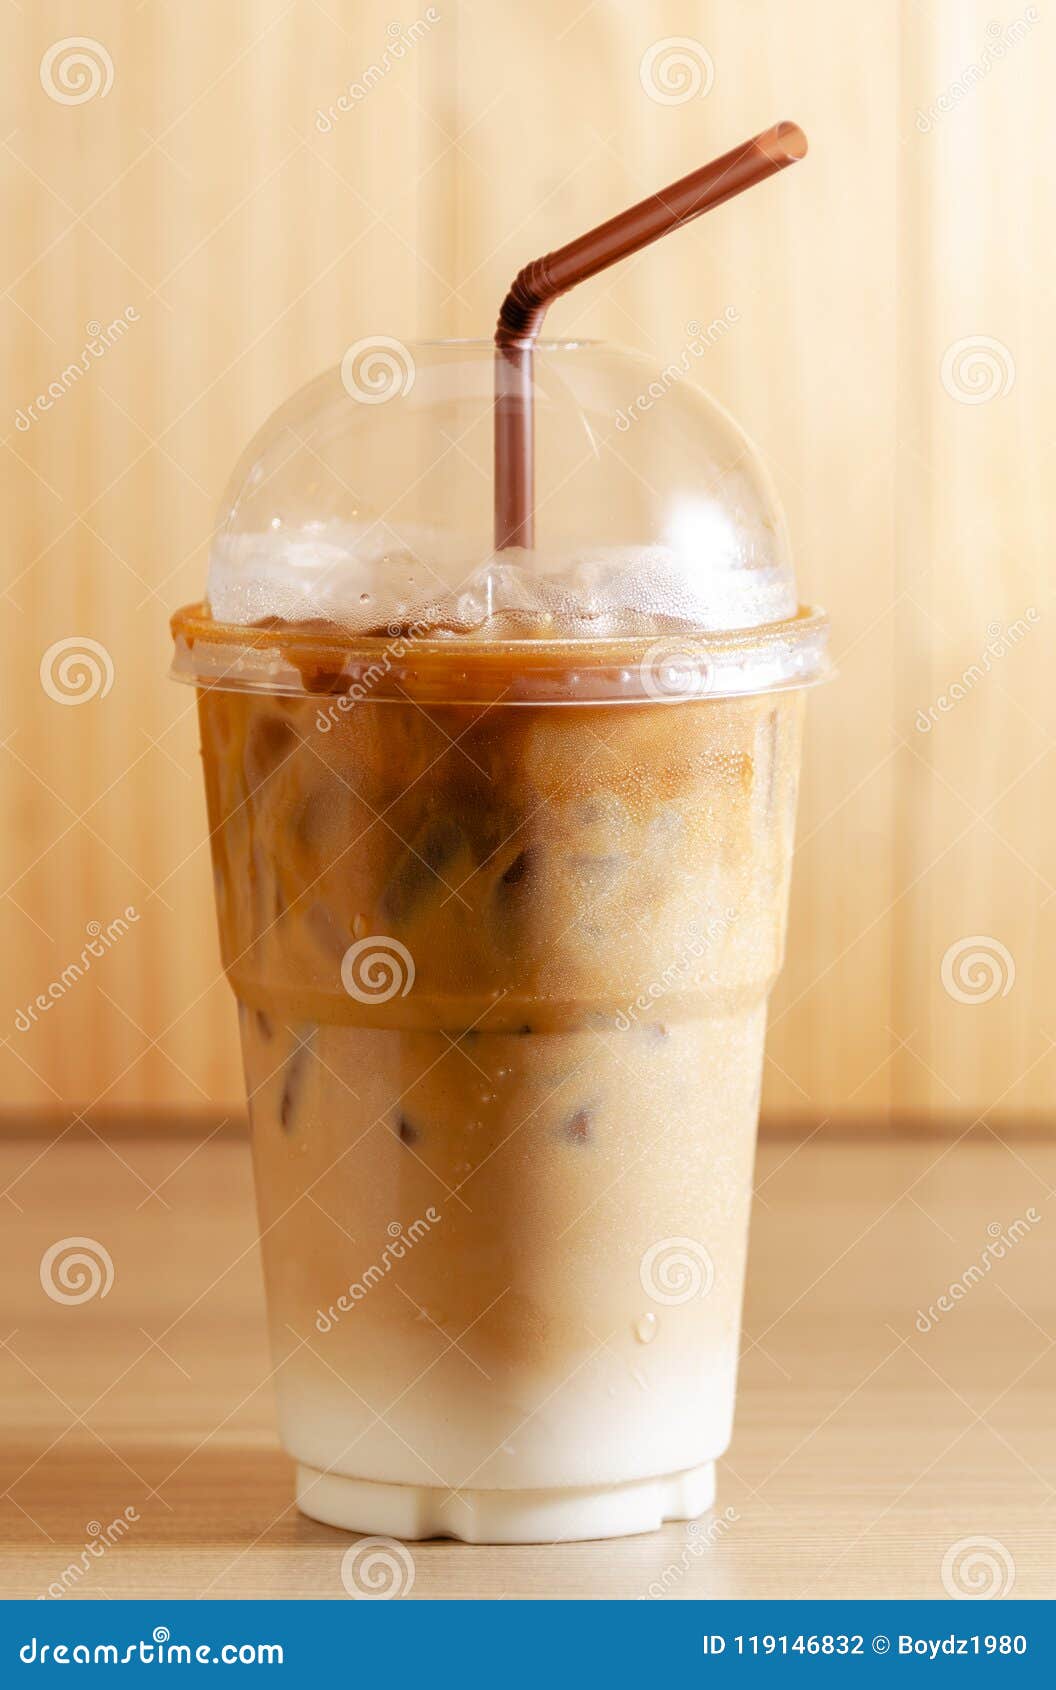 https://thumbs.dreamstime.com/z/iced-coffee-cup-straw-latte-take-away-plastic-glass-wooden-background-119146832.jpg